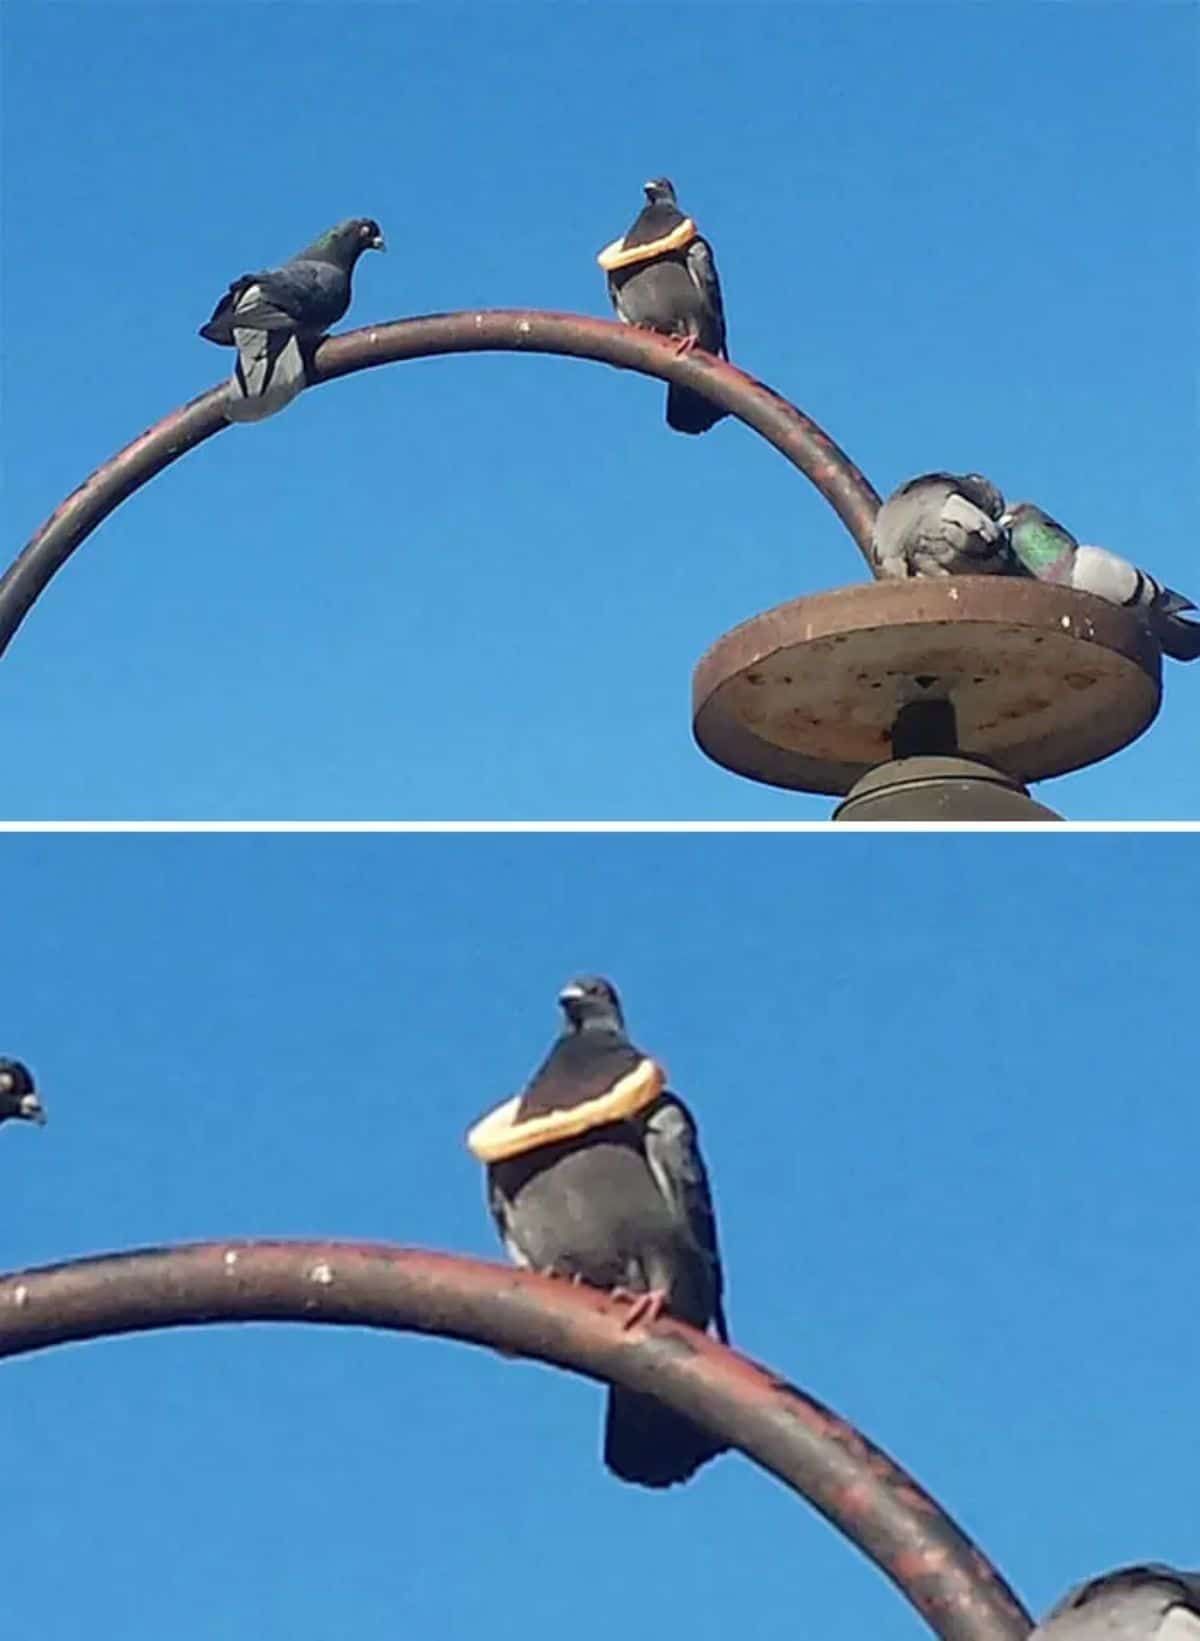 2 photos of a pigeon sitting on a metal bar with a slice of bread around its neck